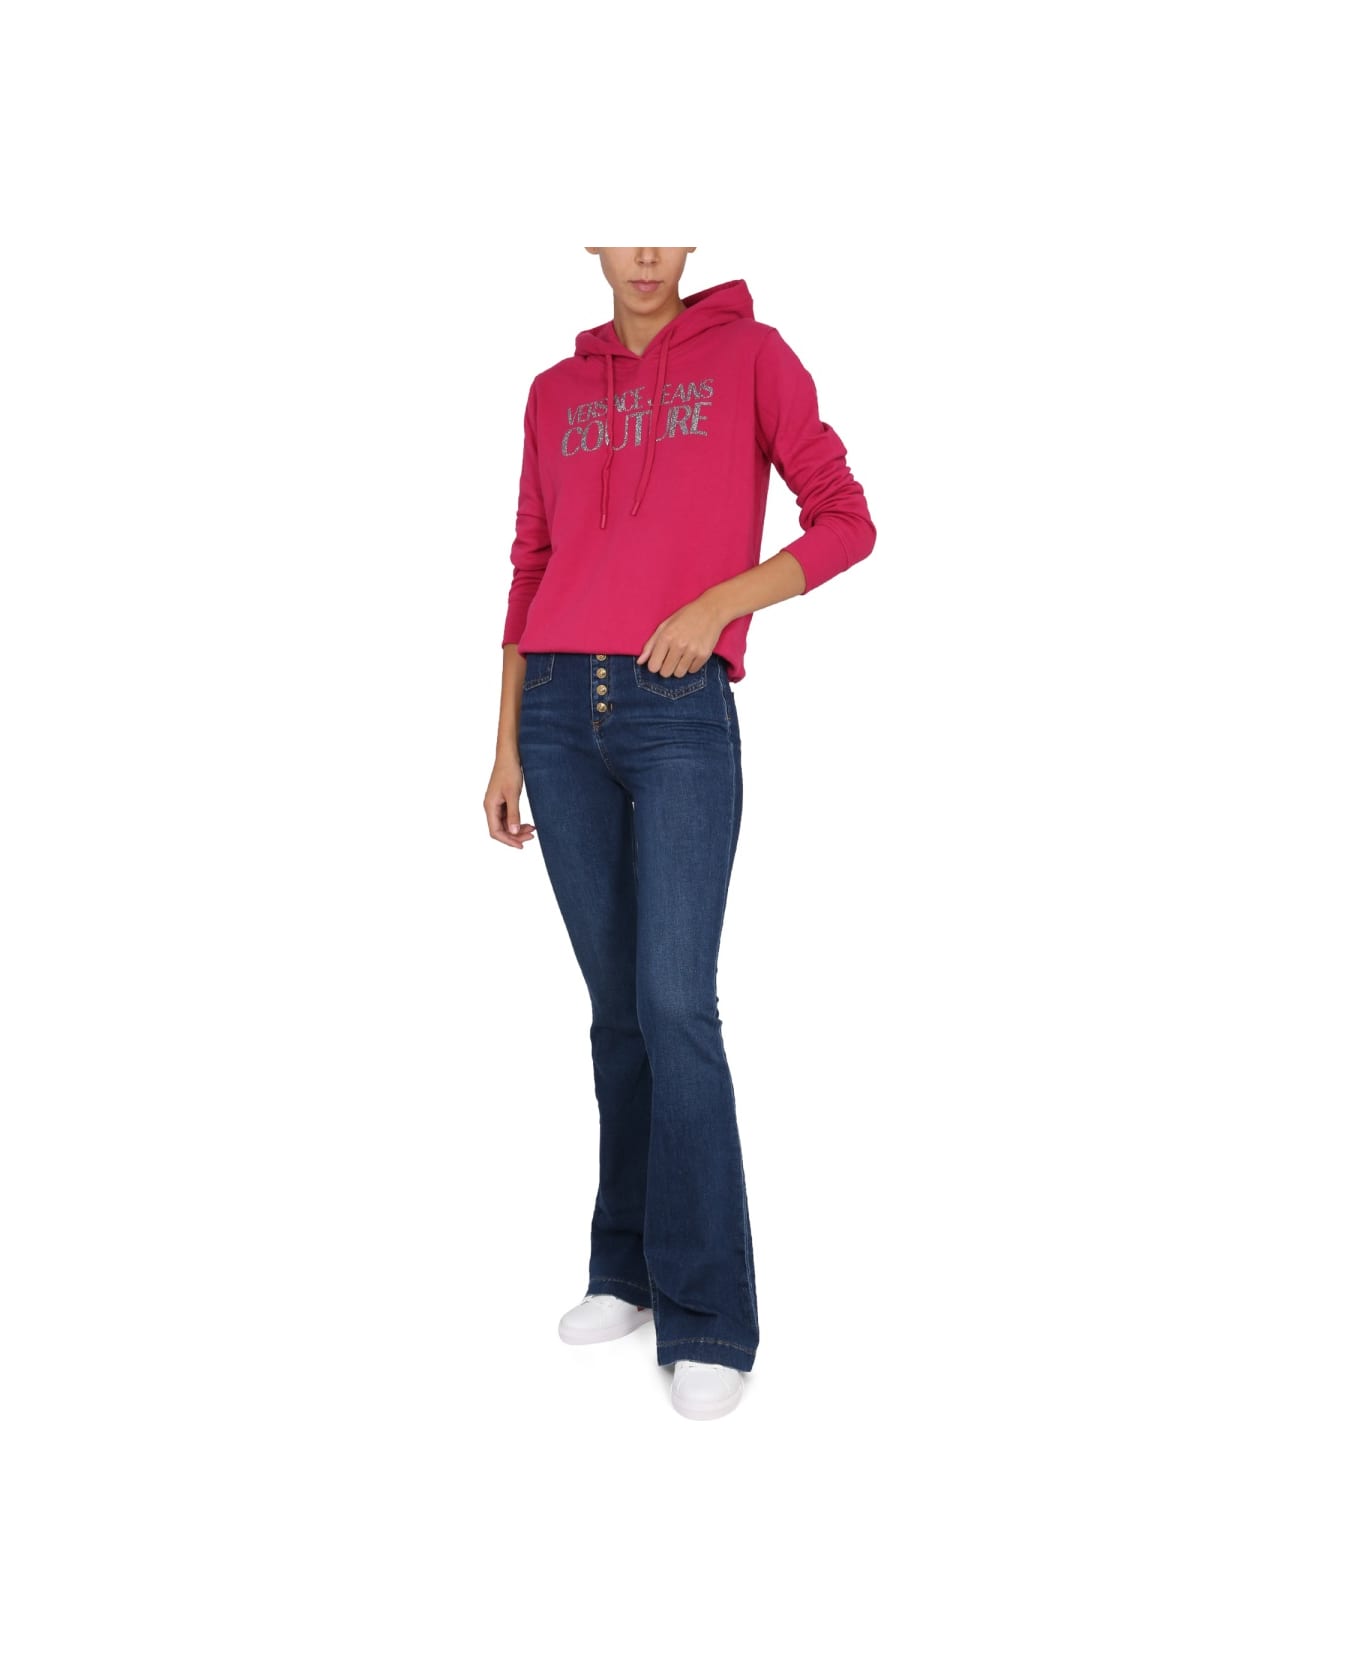 Versace Jeans Couture Sweatshirt With Logo - FUCHSIA